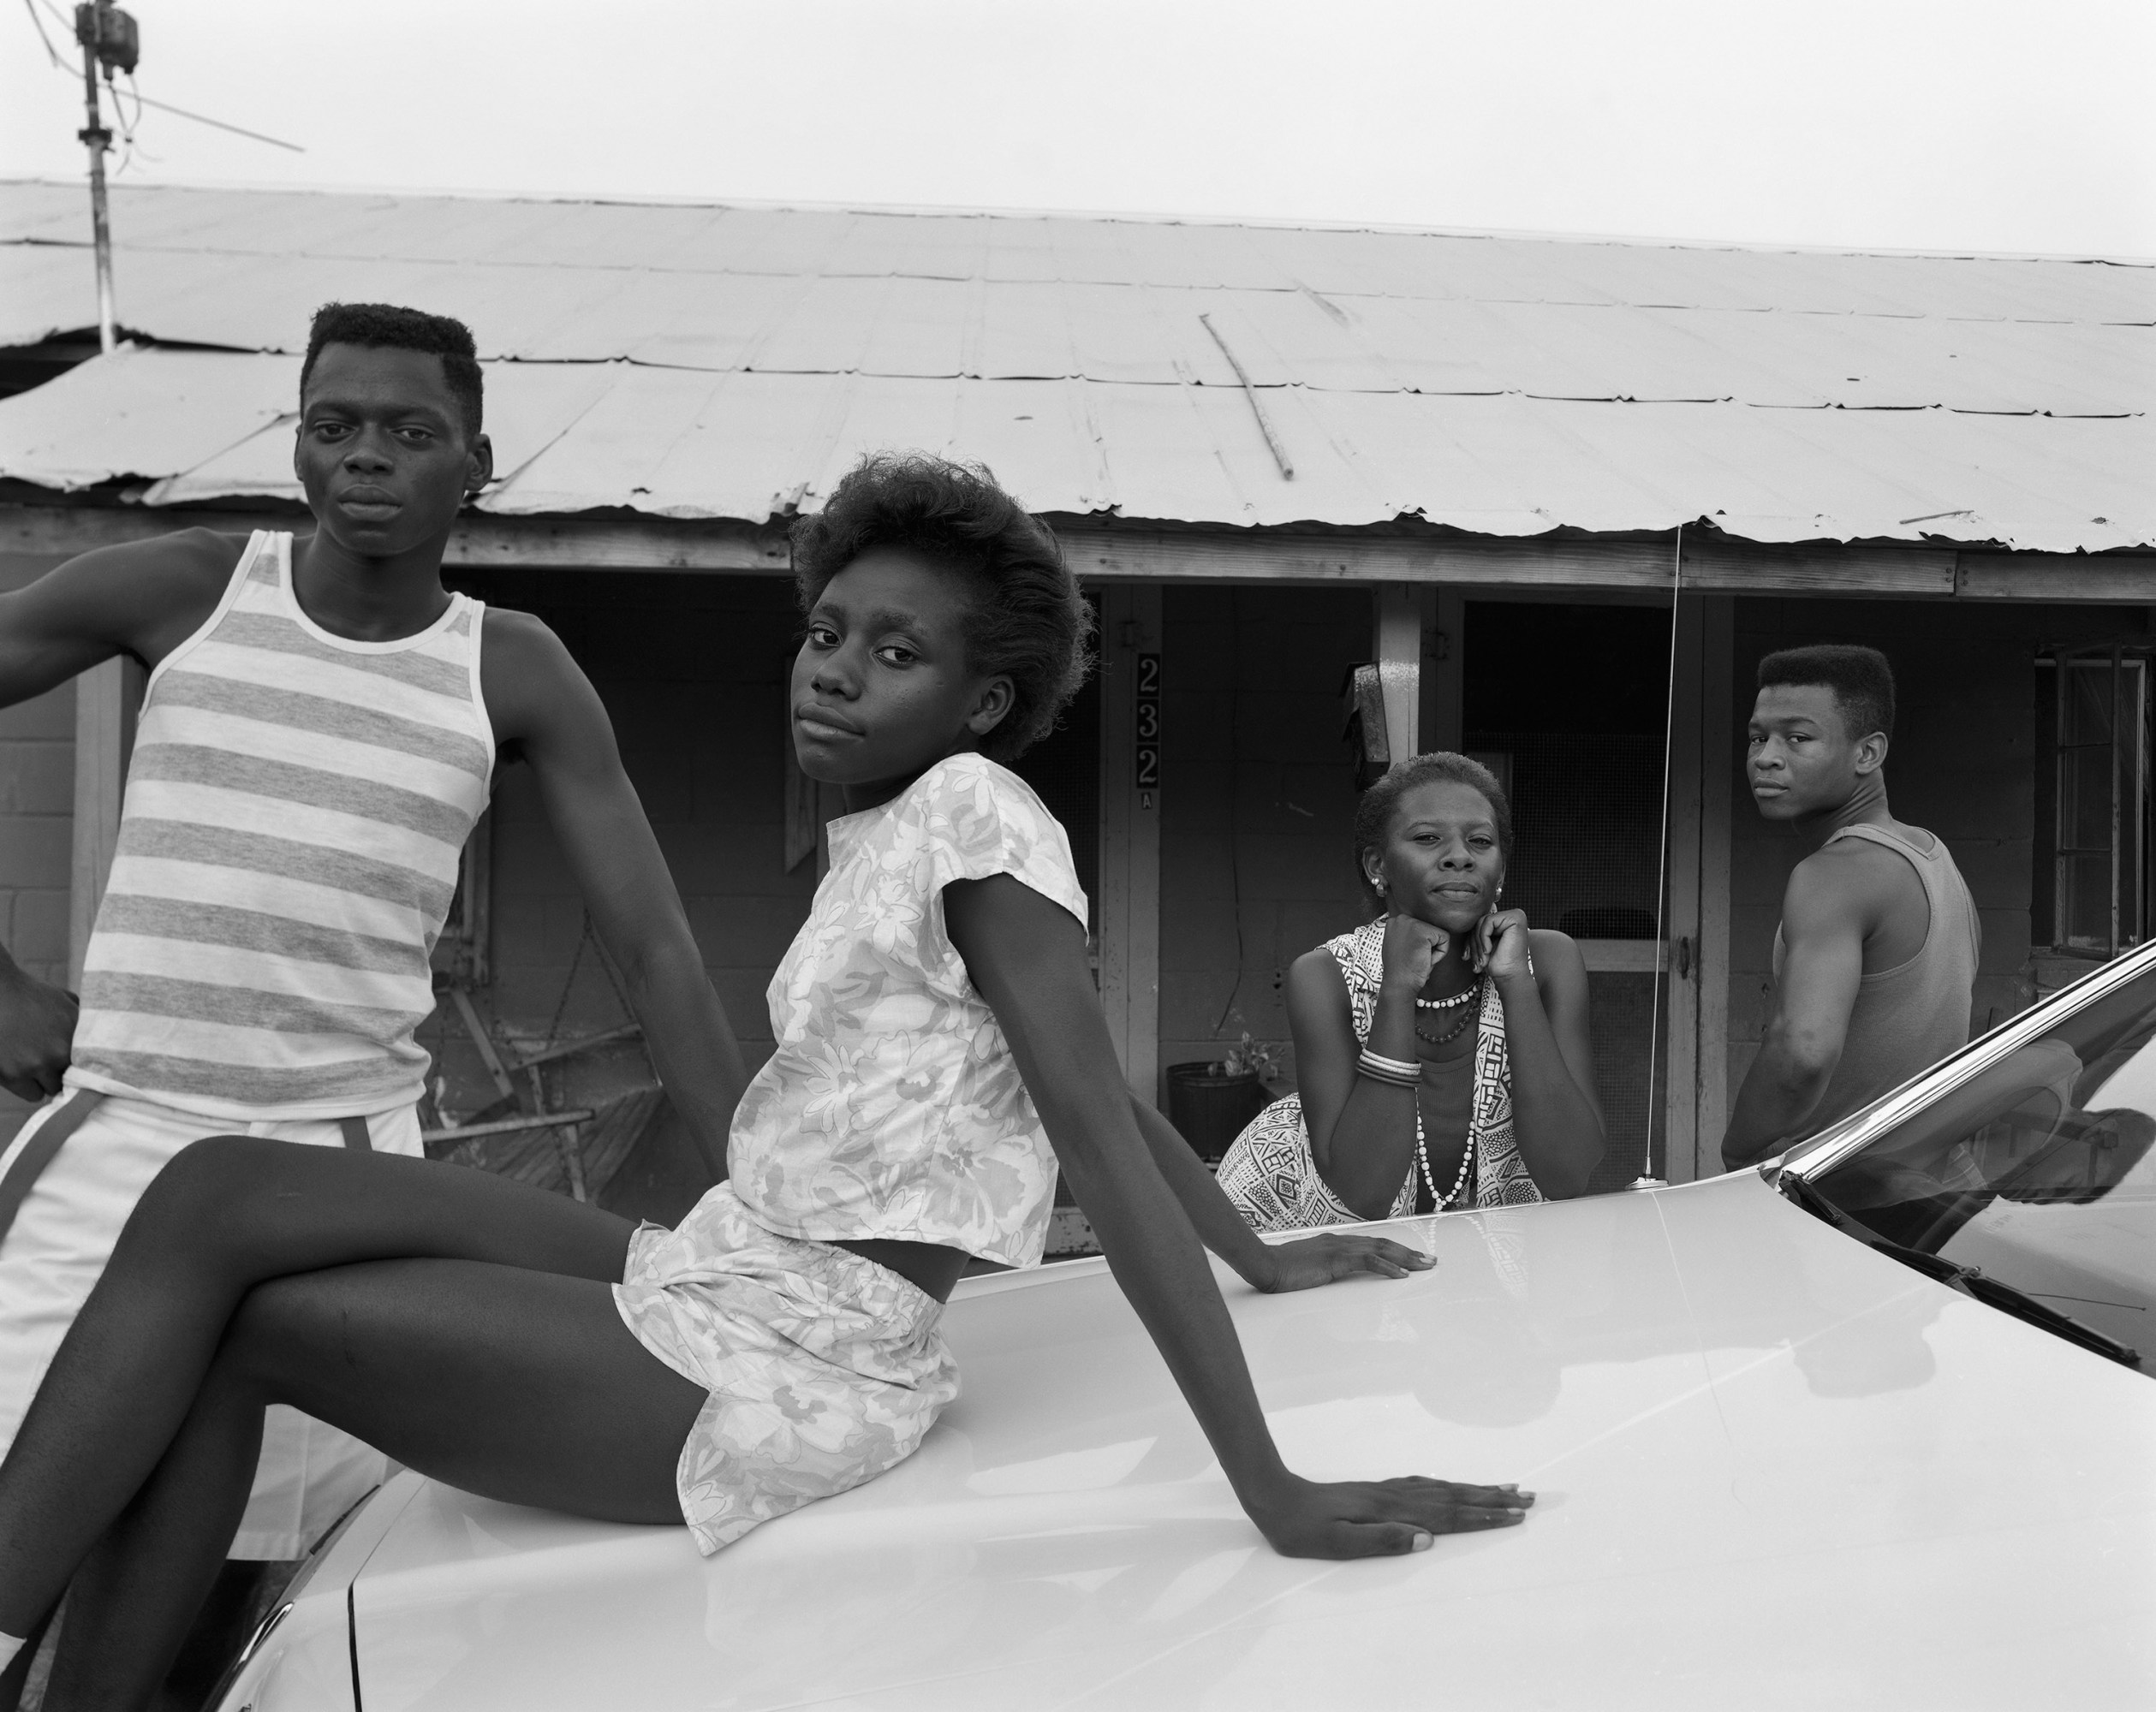 A young woman sits on the roof of a car. Behind her leaning against the same car are also two young men and a woman.